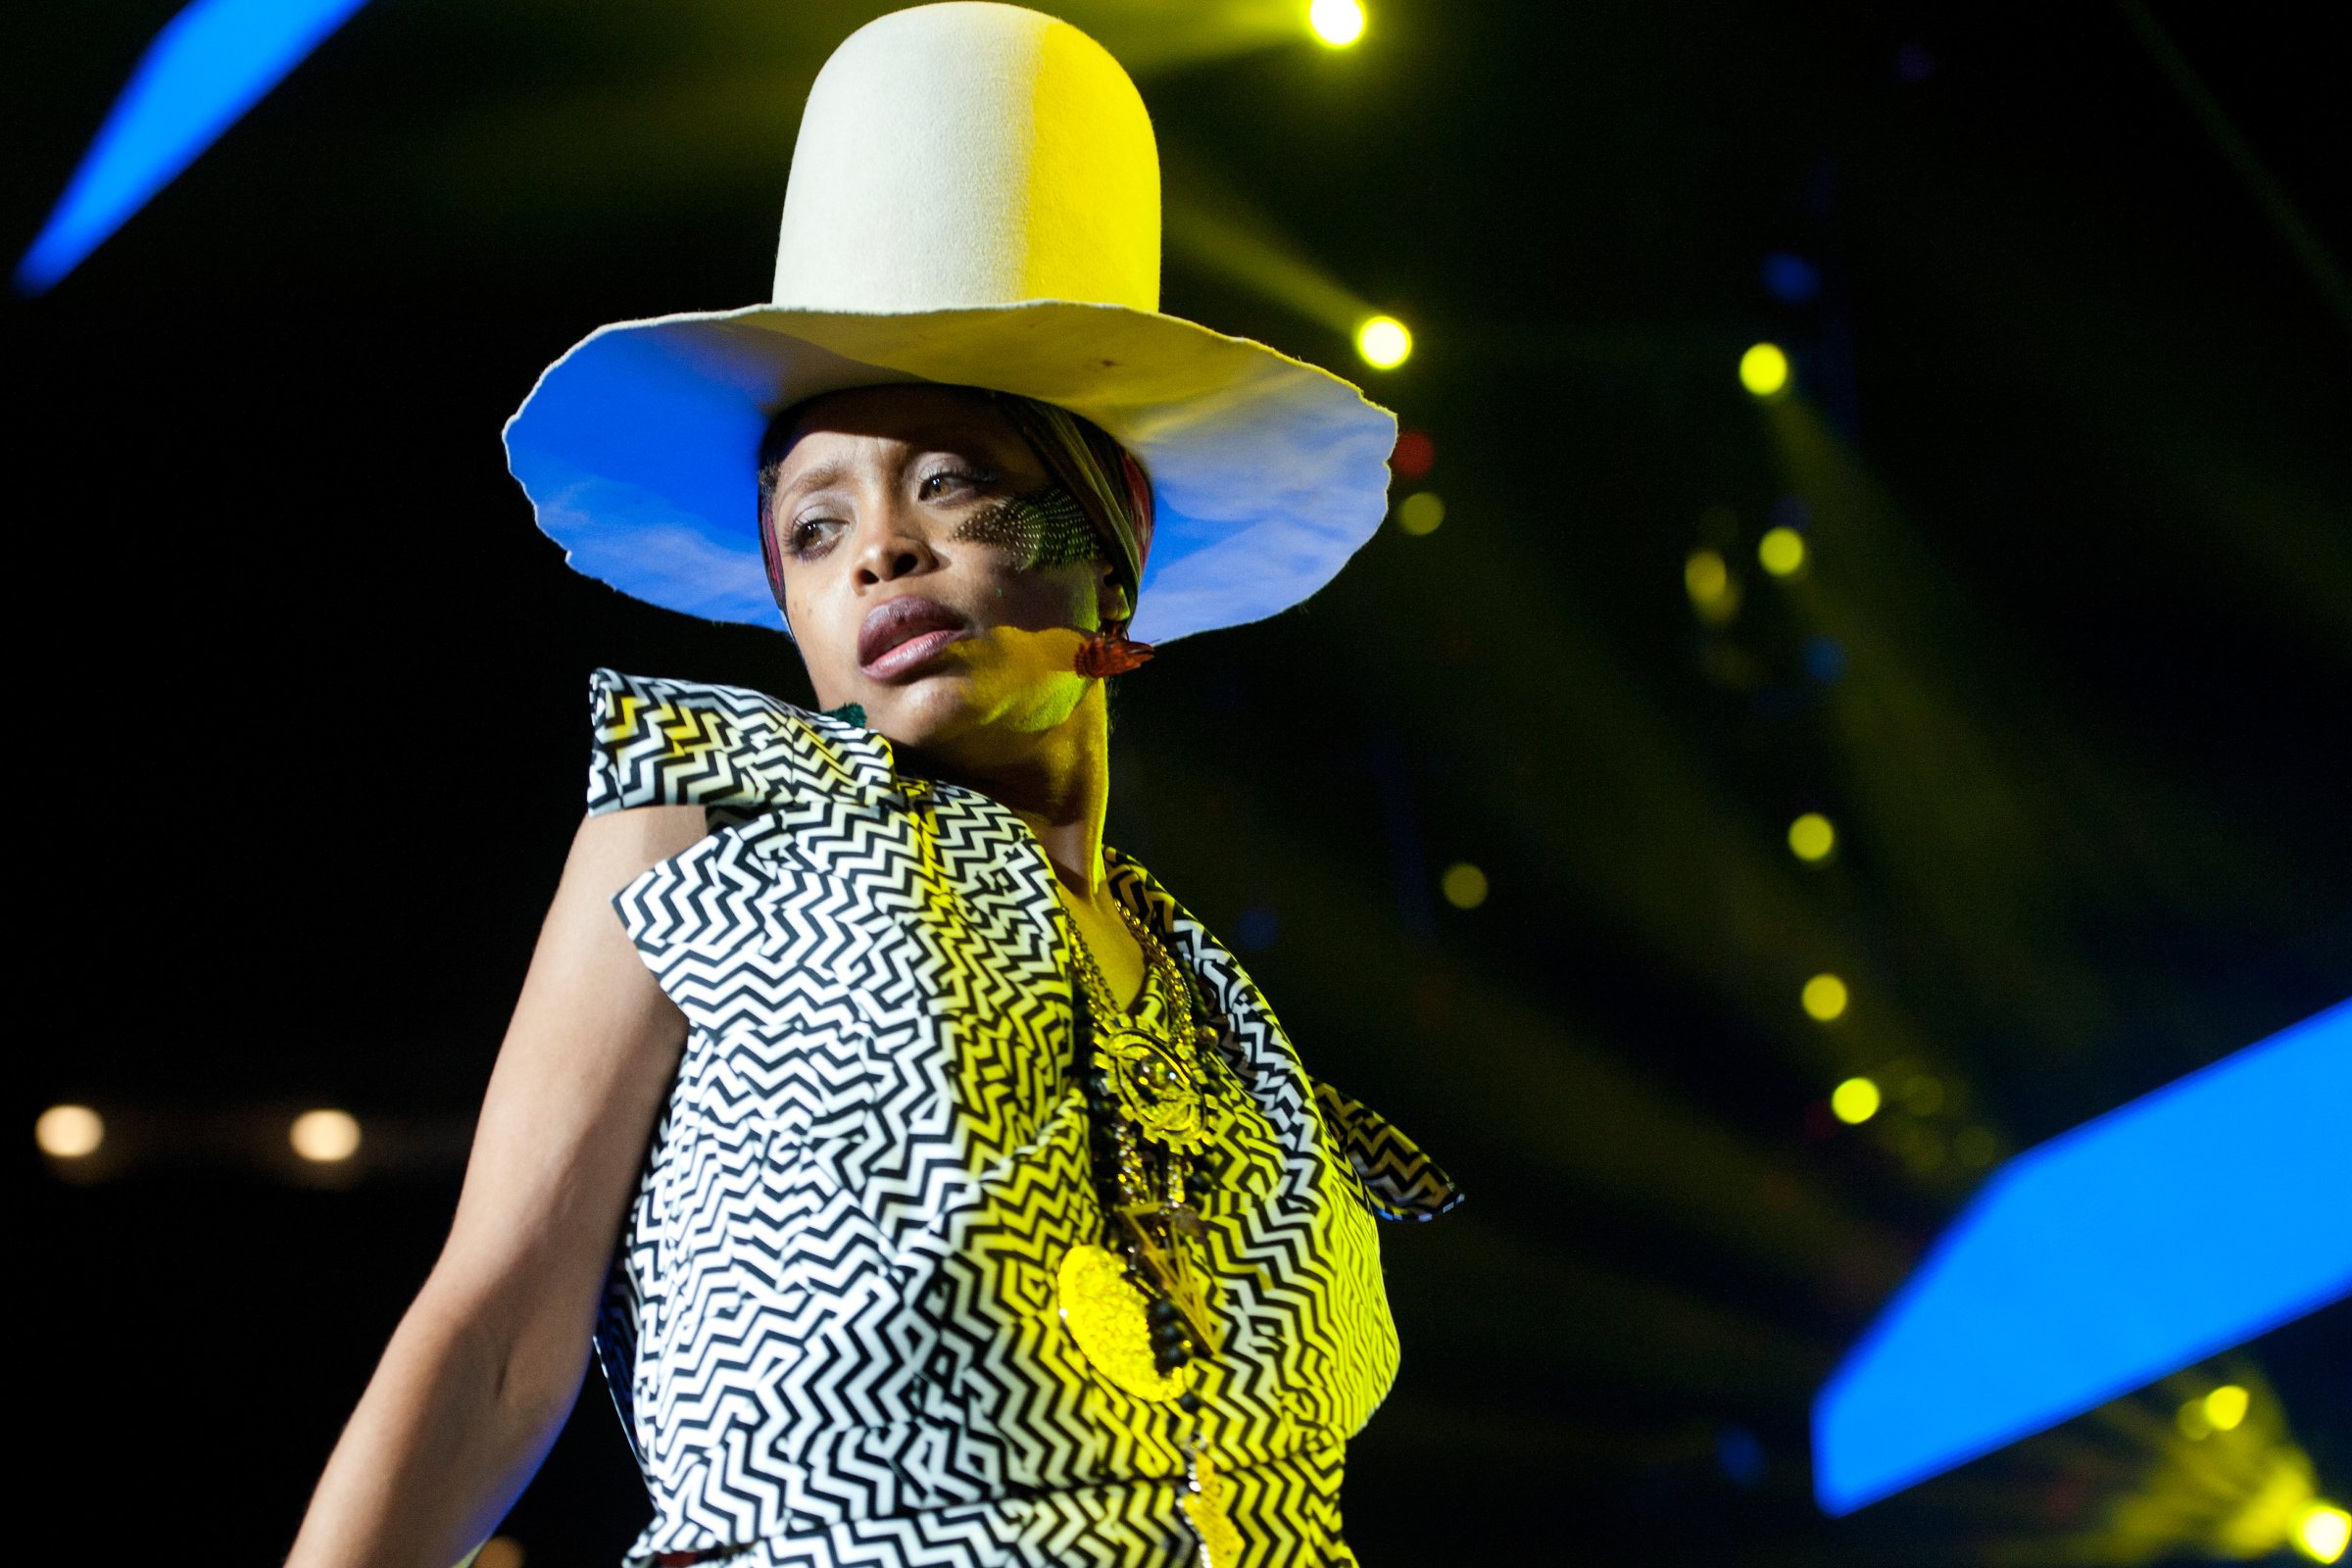 Erykah Badu performs during the 2014 Essence Music Festival on July 6, 2014 in New Orleans, Louisiana.